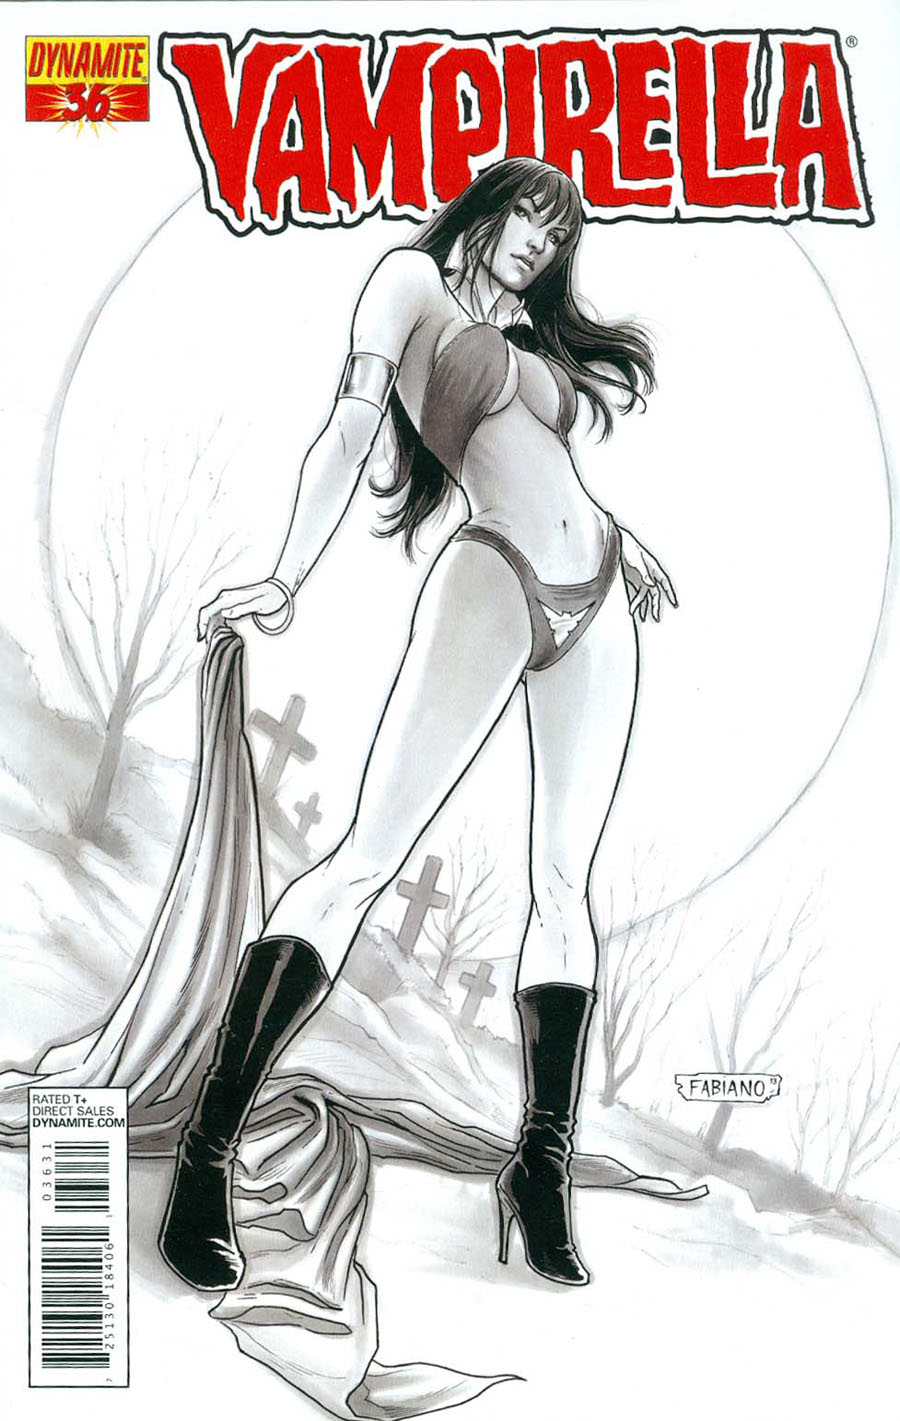 Vampirella Vol 4 #36 Cover C High-End Fabiano Neves Black & White Ultra-Limited Cover (ONLY 50 COPIES IN EXISTENCE!)